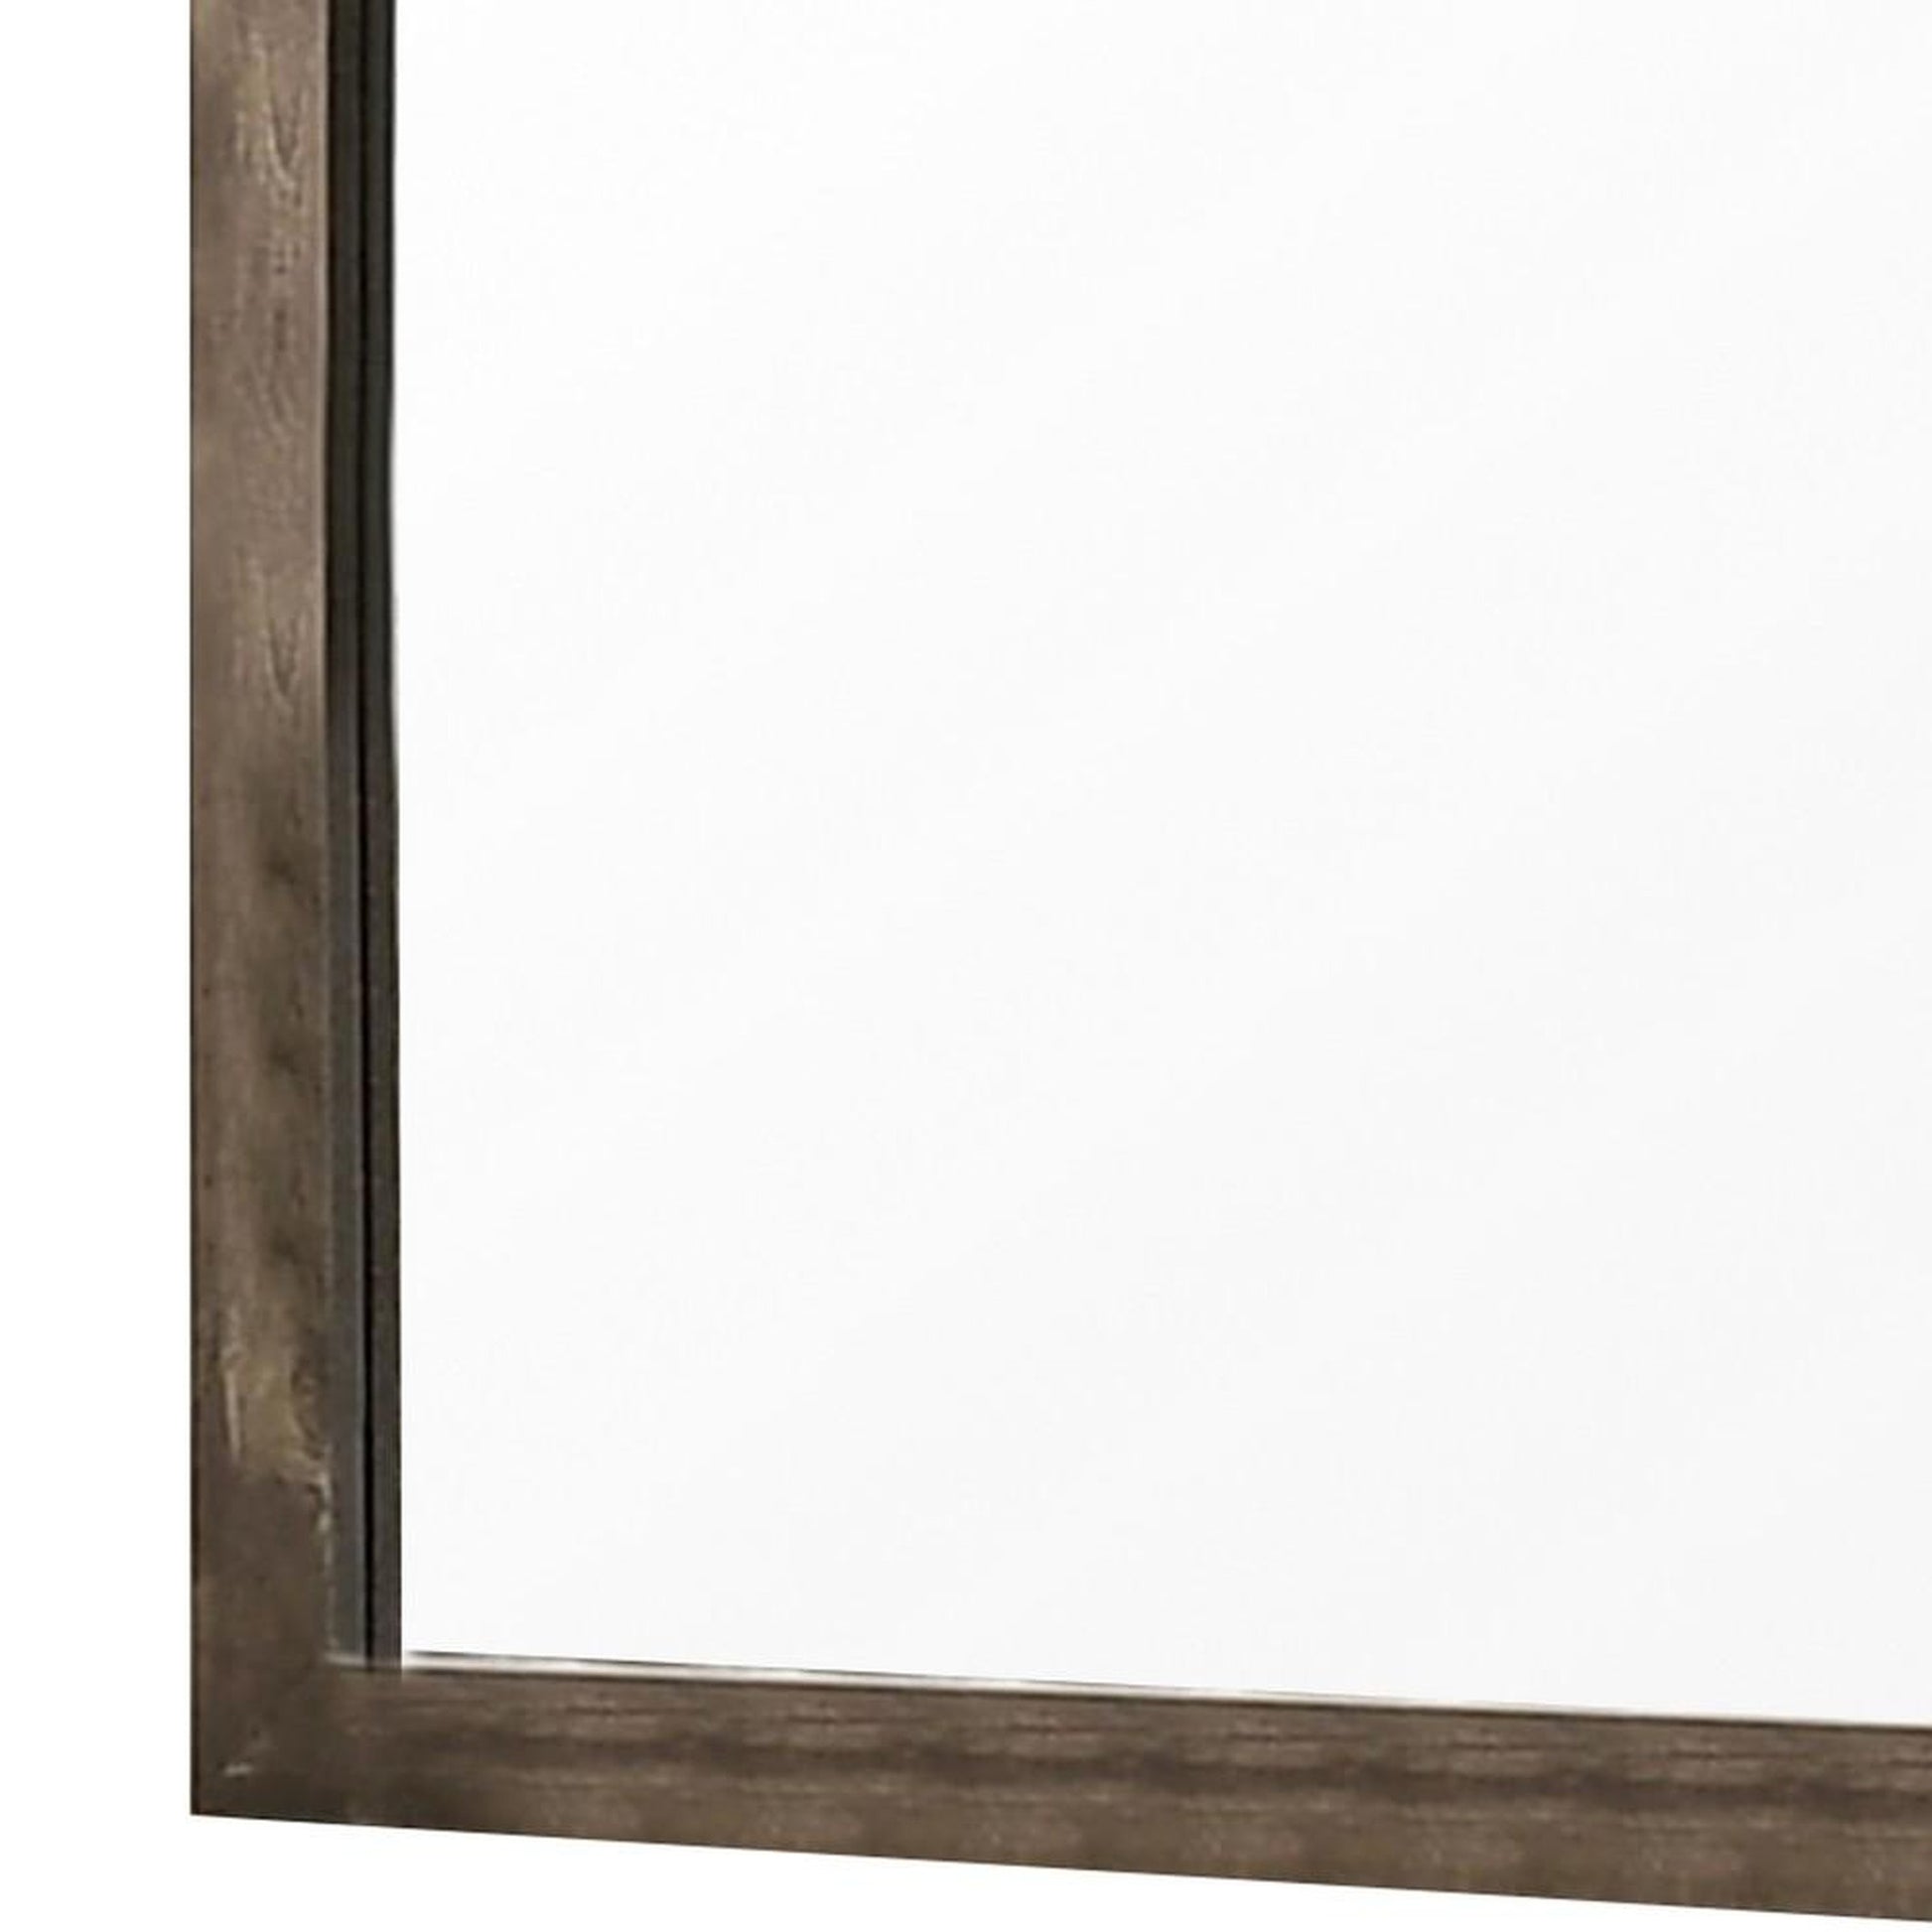 Benzara 40" Square Brown Farmhouse Wooden Framed Wall Mirror With Grain Details